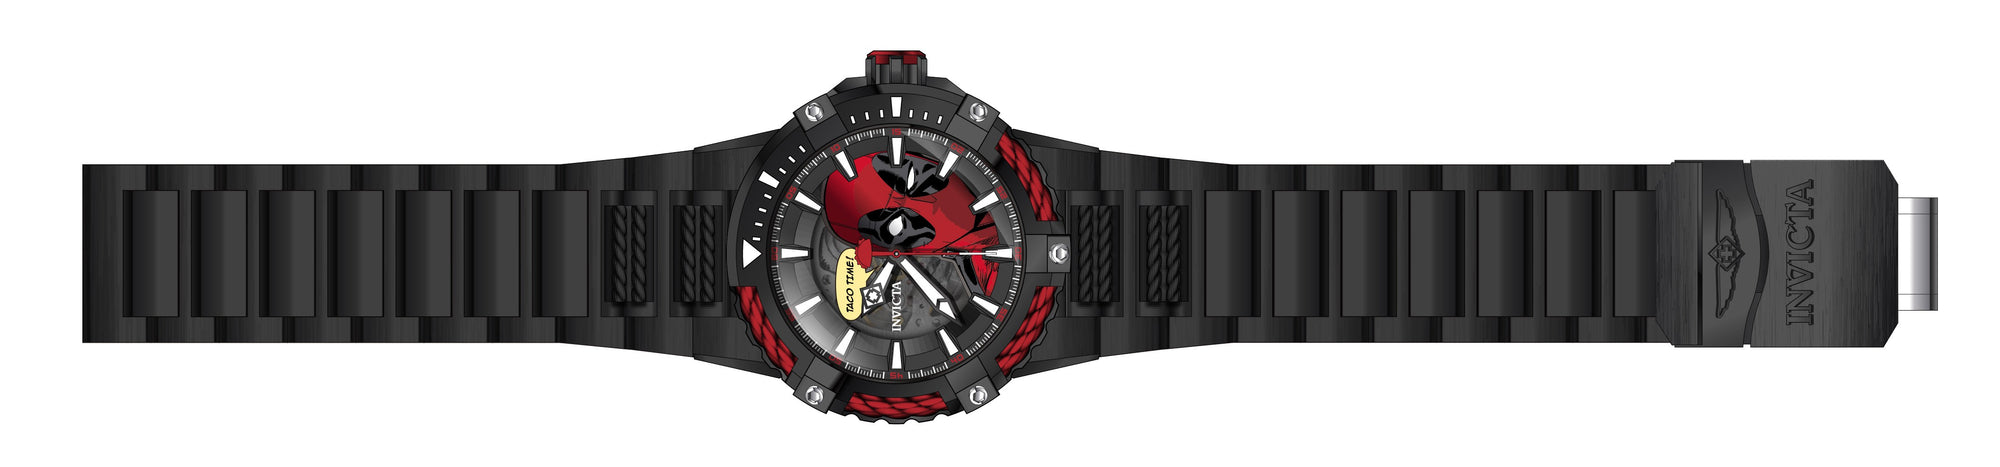 Band for Invicta Marvel 27326